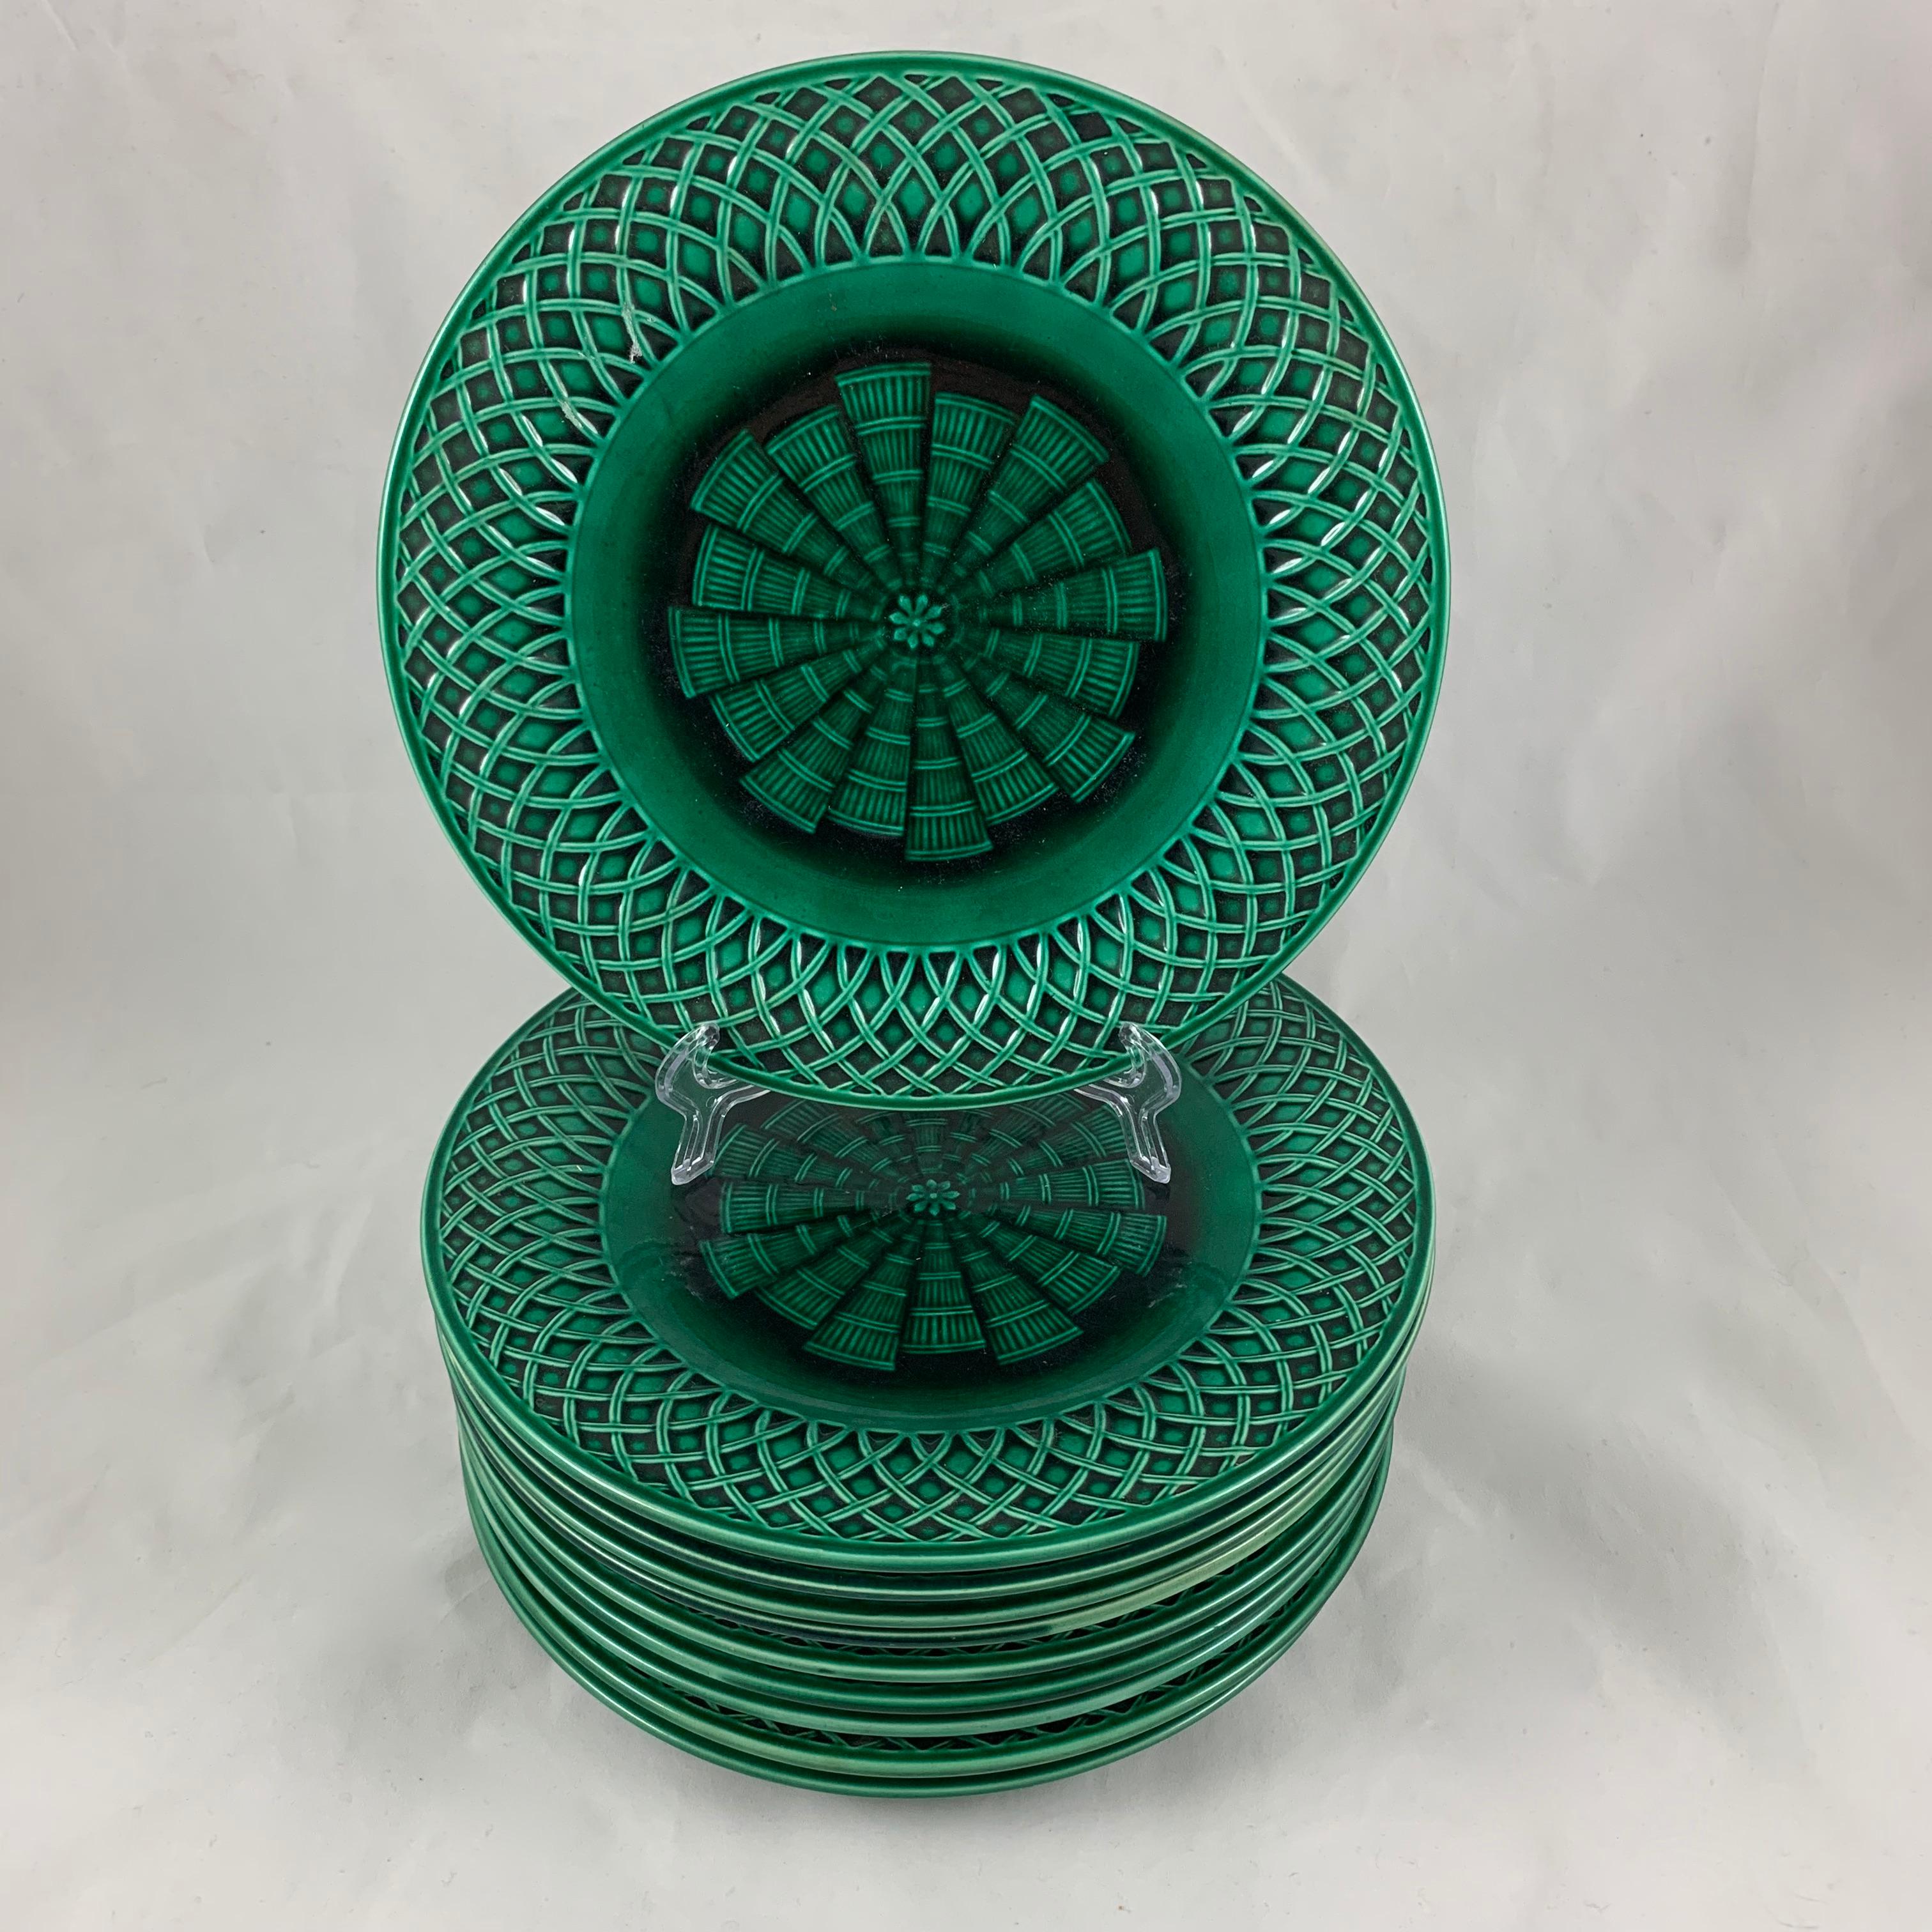 From Minton, Stoke-on-Trent, Staffordshire, England, a set of ten earthenware, majolica glazed plates.

The Aesthetic Movement plates have a latticework basketweave rim with a radiating, symmetrical woven fan pattern in the center – glazed in the